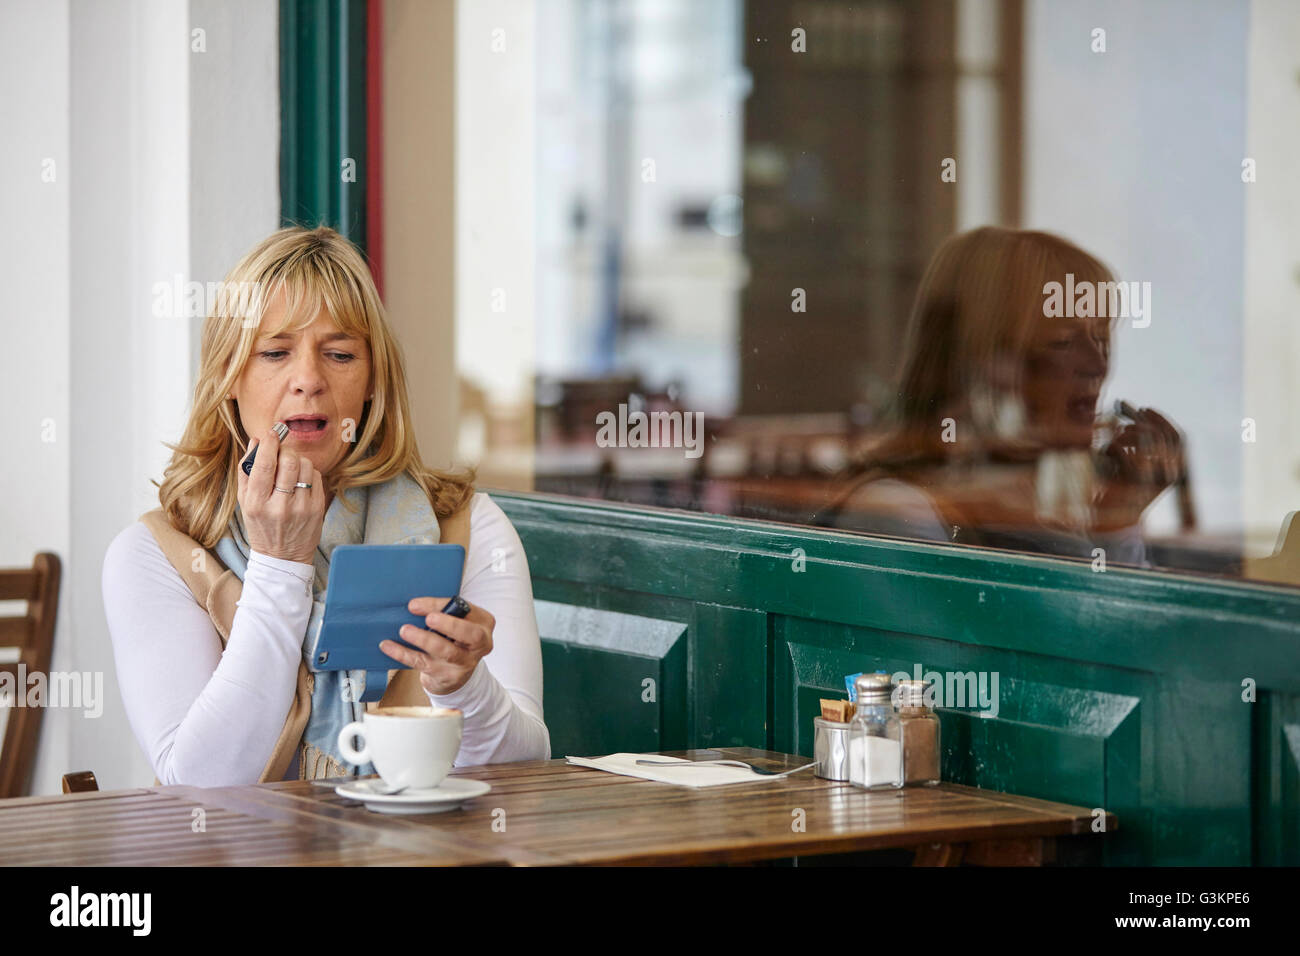 Mature woman using smartphone to apply lipstick at sidewalk cafe table Stock Photo